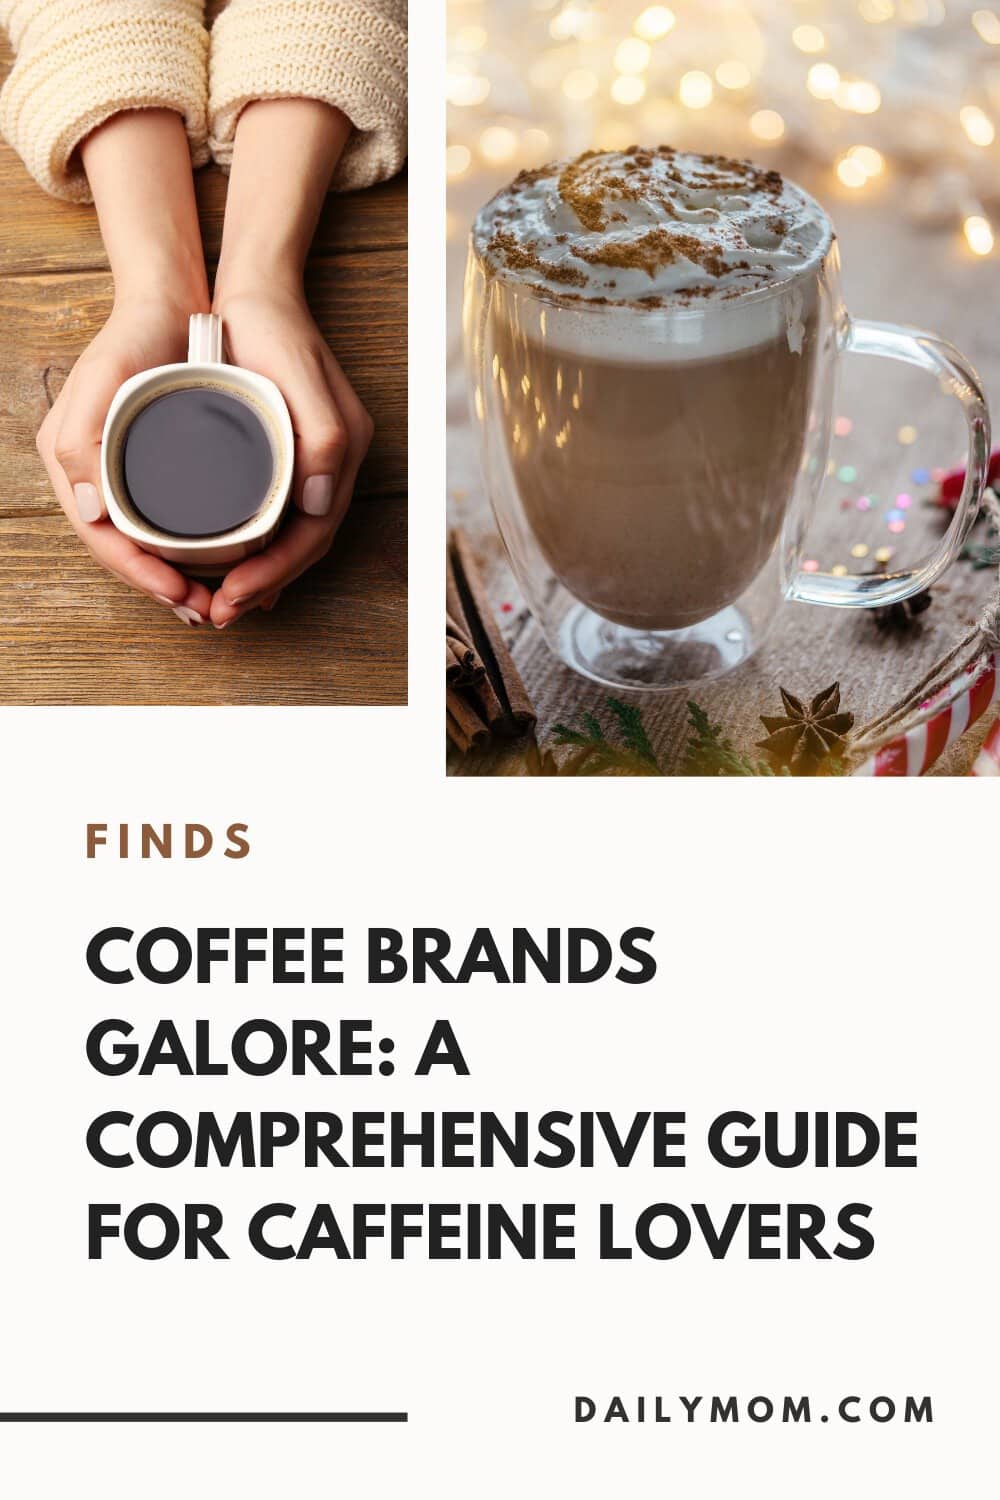 The Best Coffee Brands: A Comprehensive Guide For Caffeine Lovers 48 Daily Mom, Magazine For Families